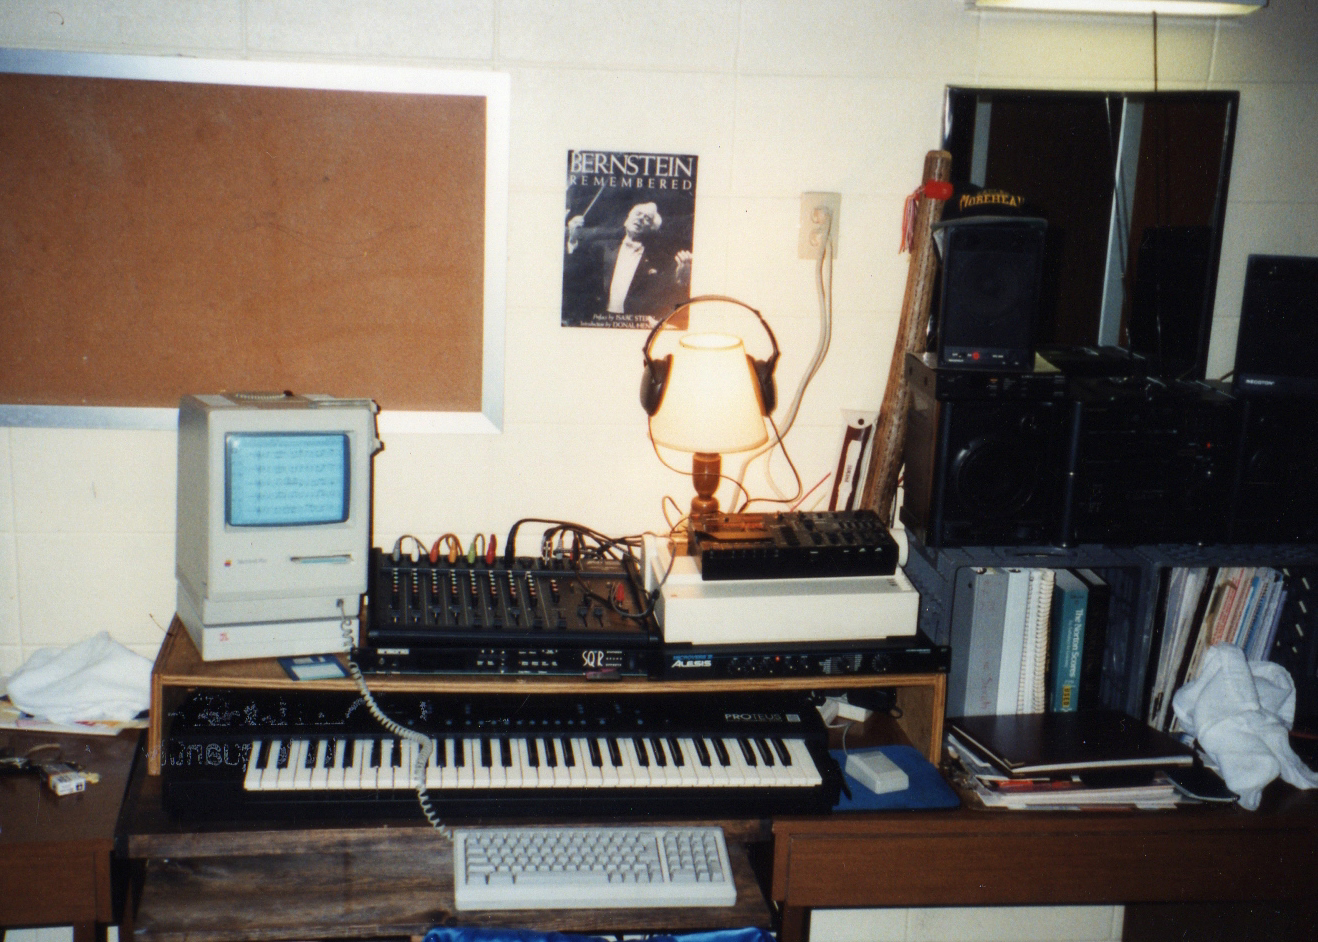 Macintosh computer with a music keyboard connected in a dormitory from around 1991.